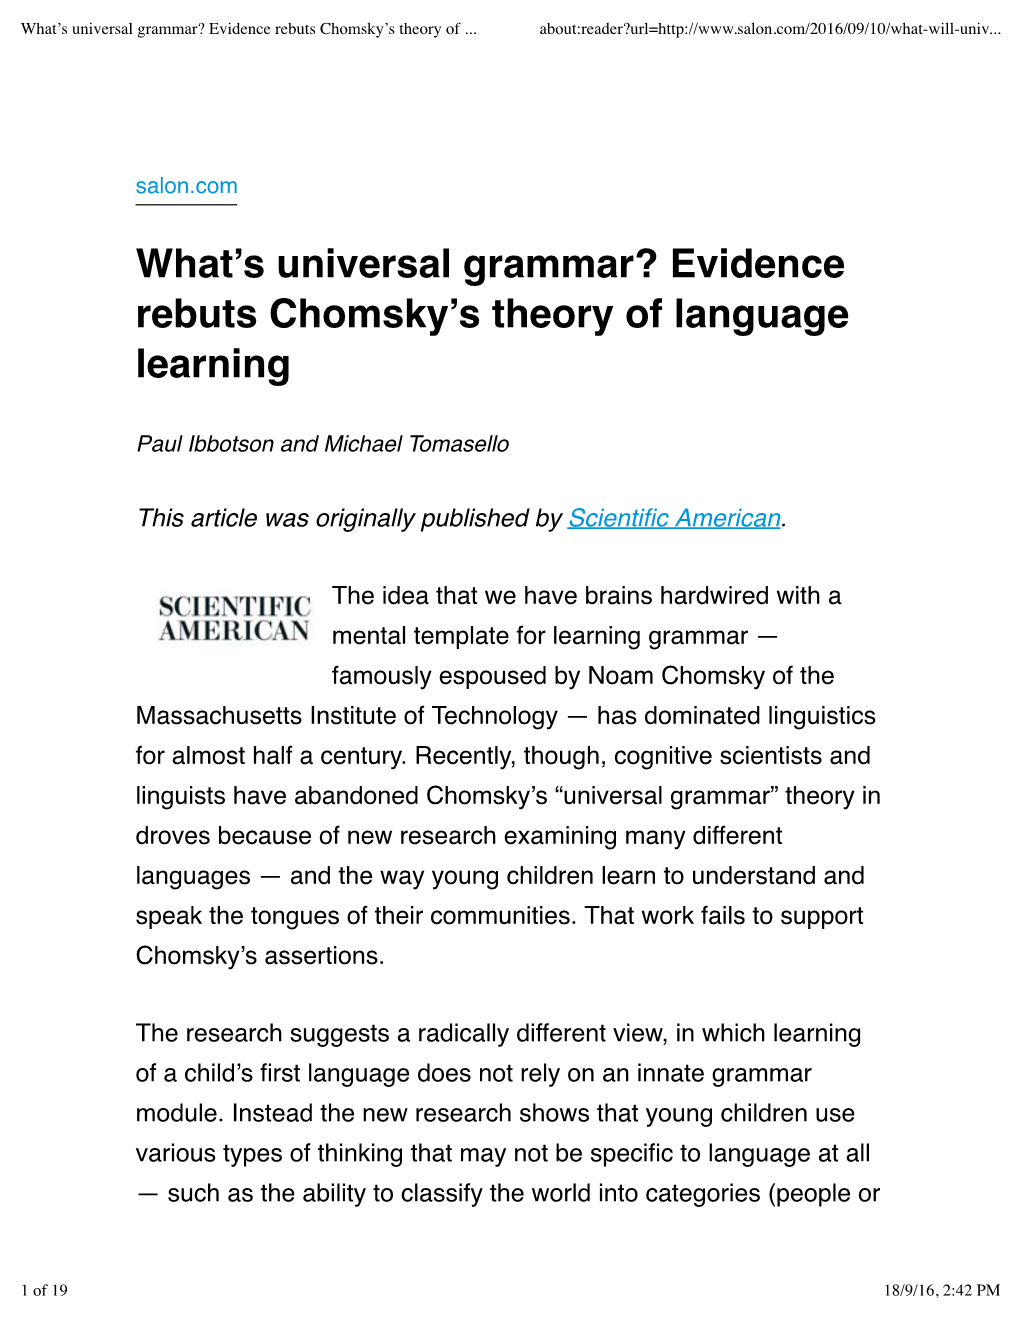 What's Universal Grammar? Evidence Rebuts Chomsky's Theory Of